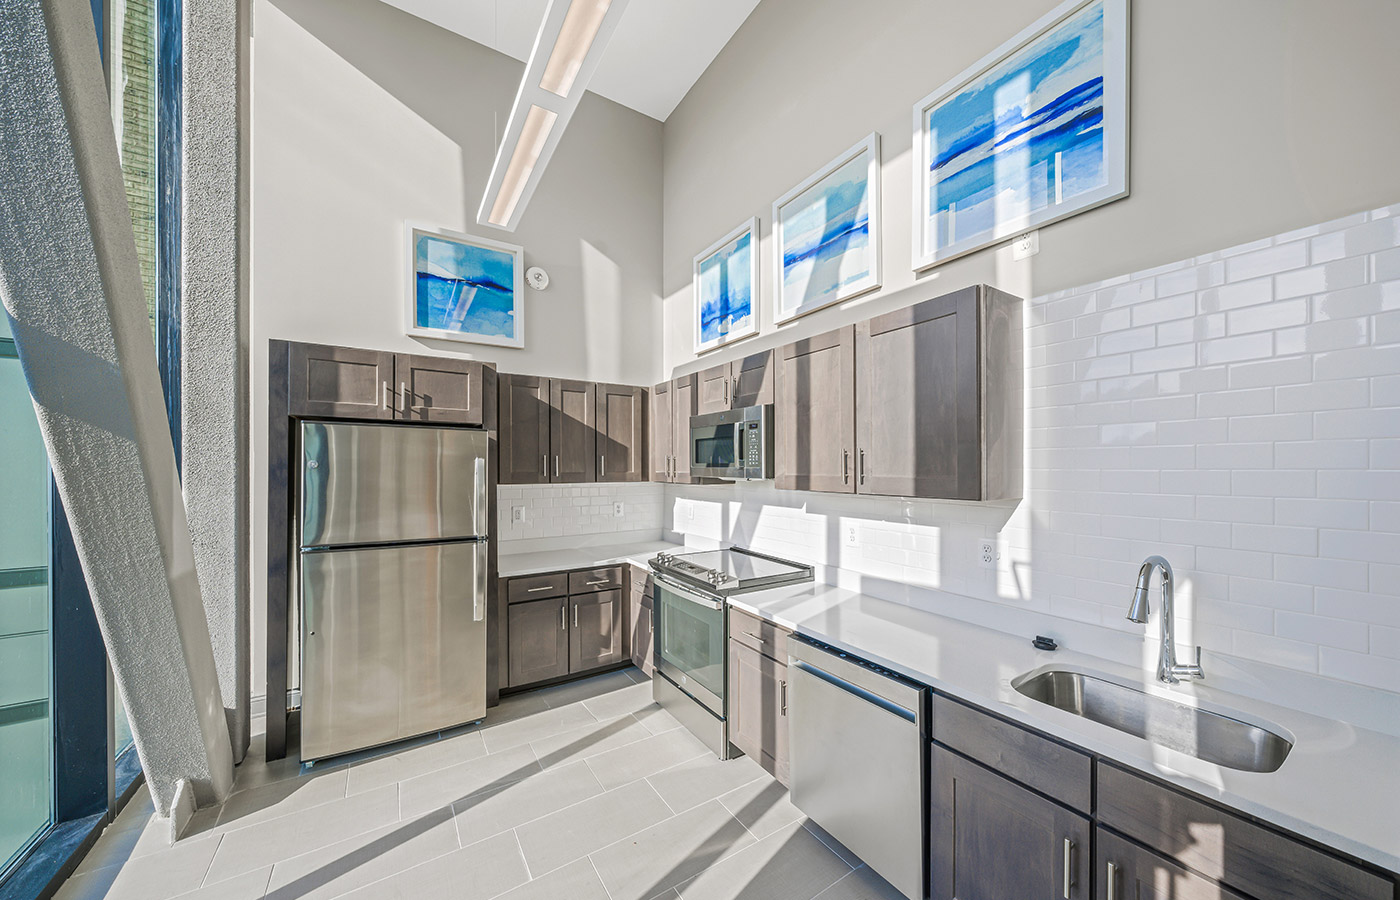 A kitchen in an apartment at The Skybridge at Town Center.